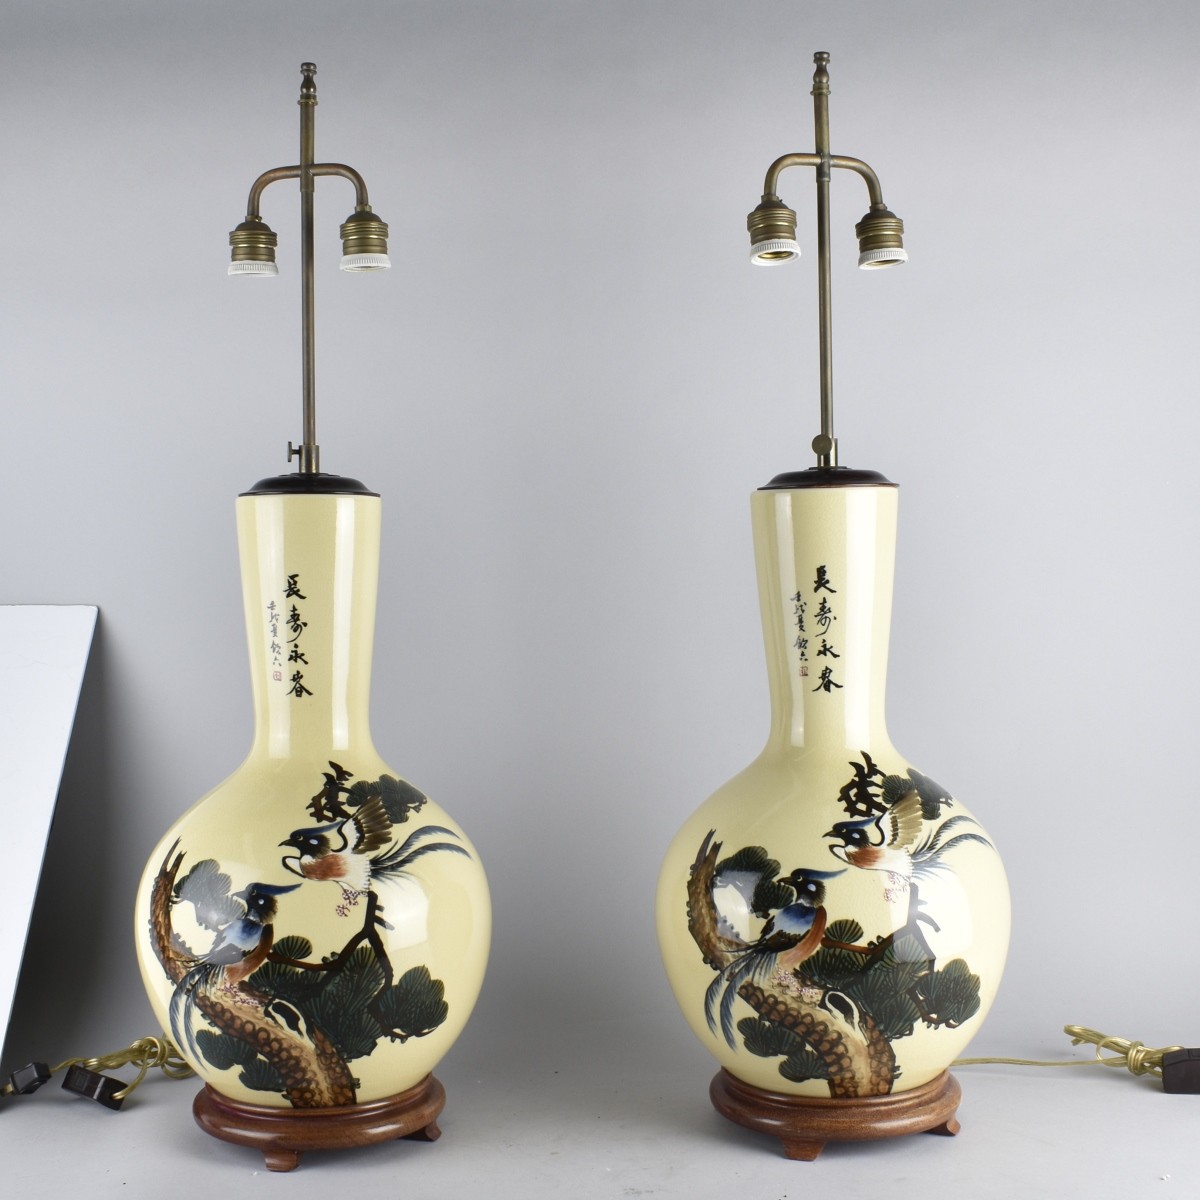 Pair of Large Japanese Porcelain Lamps